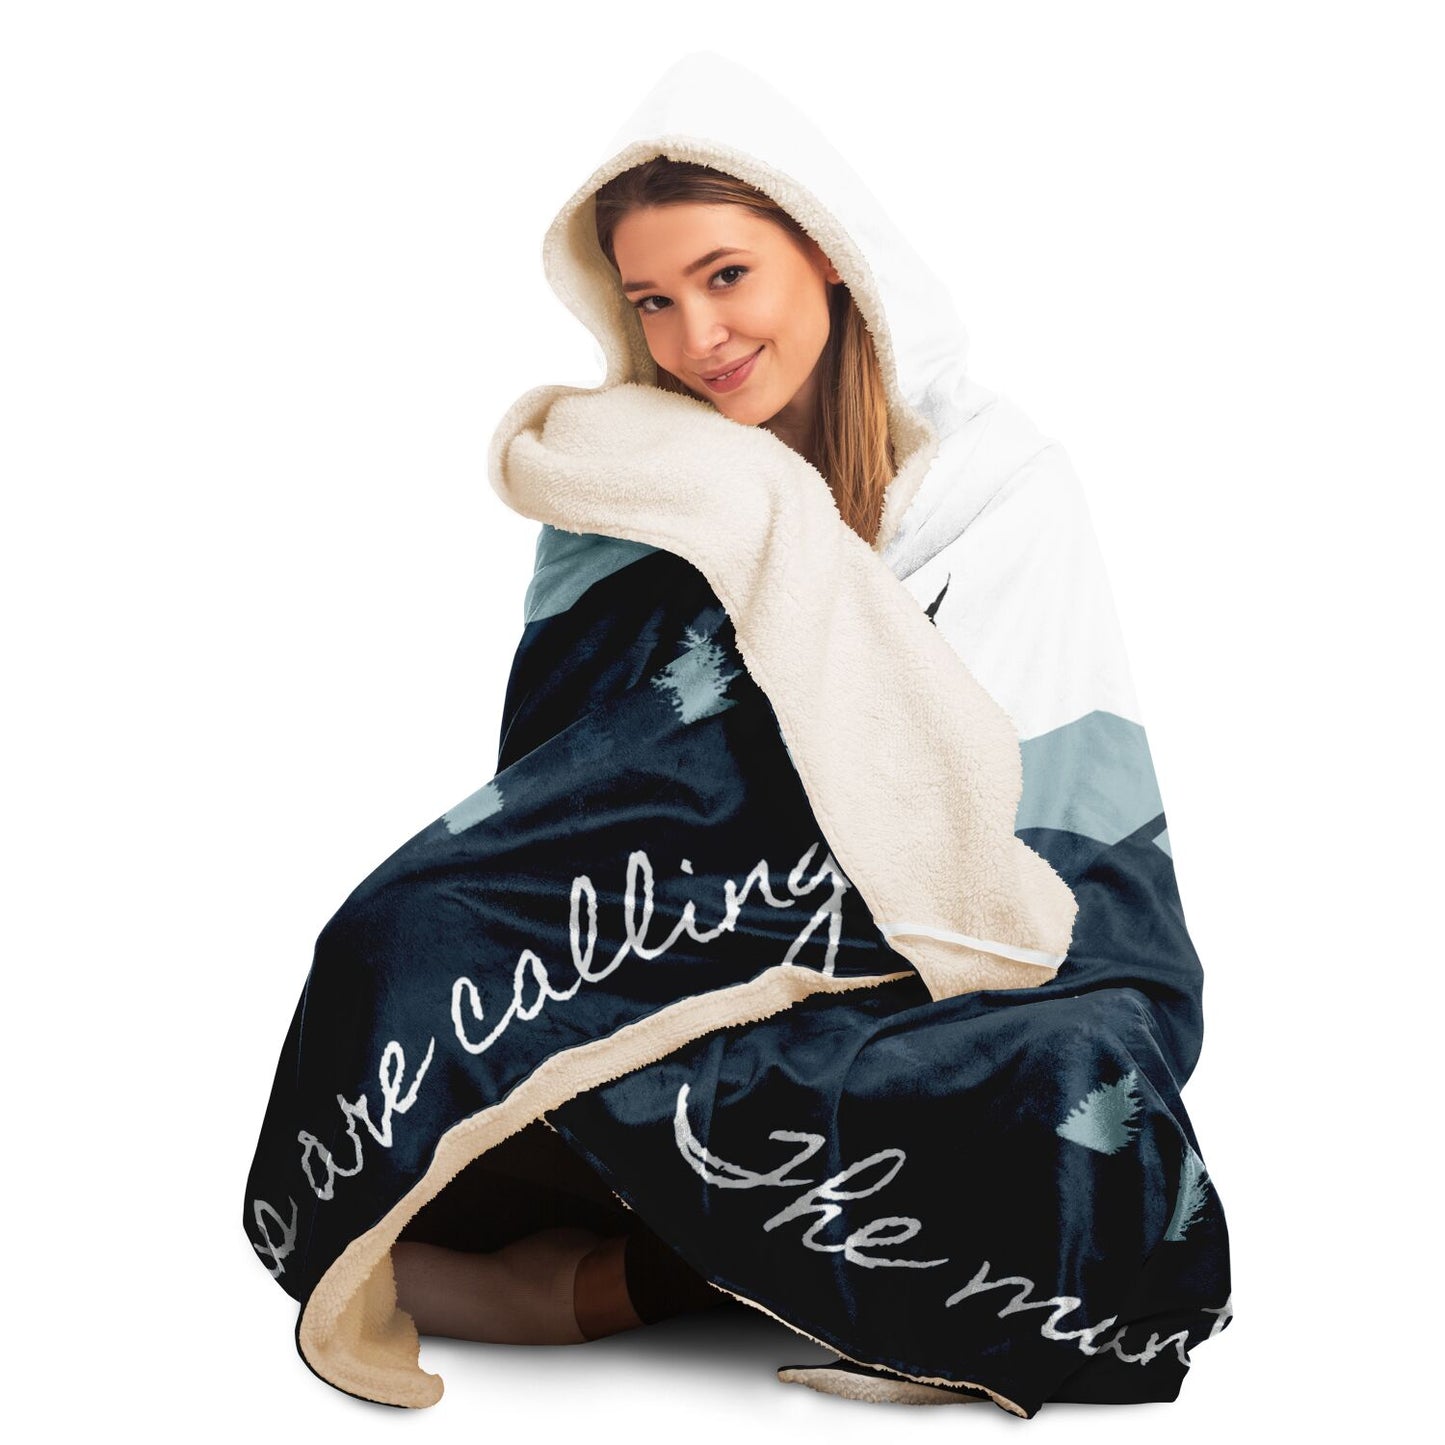 The Mountains Are Calling Hooded Blanket- Blue & White Blanket